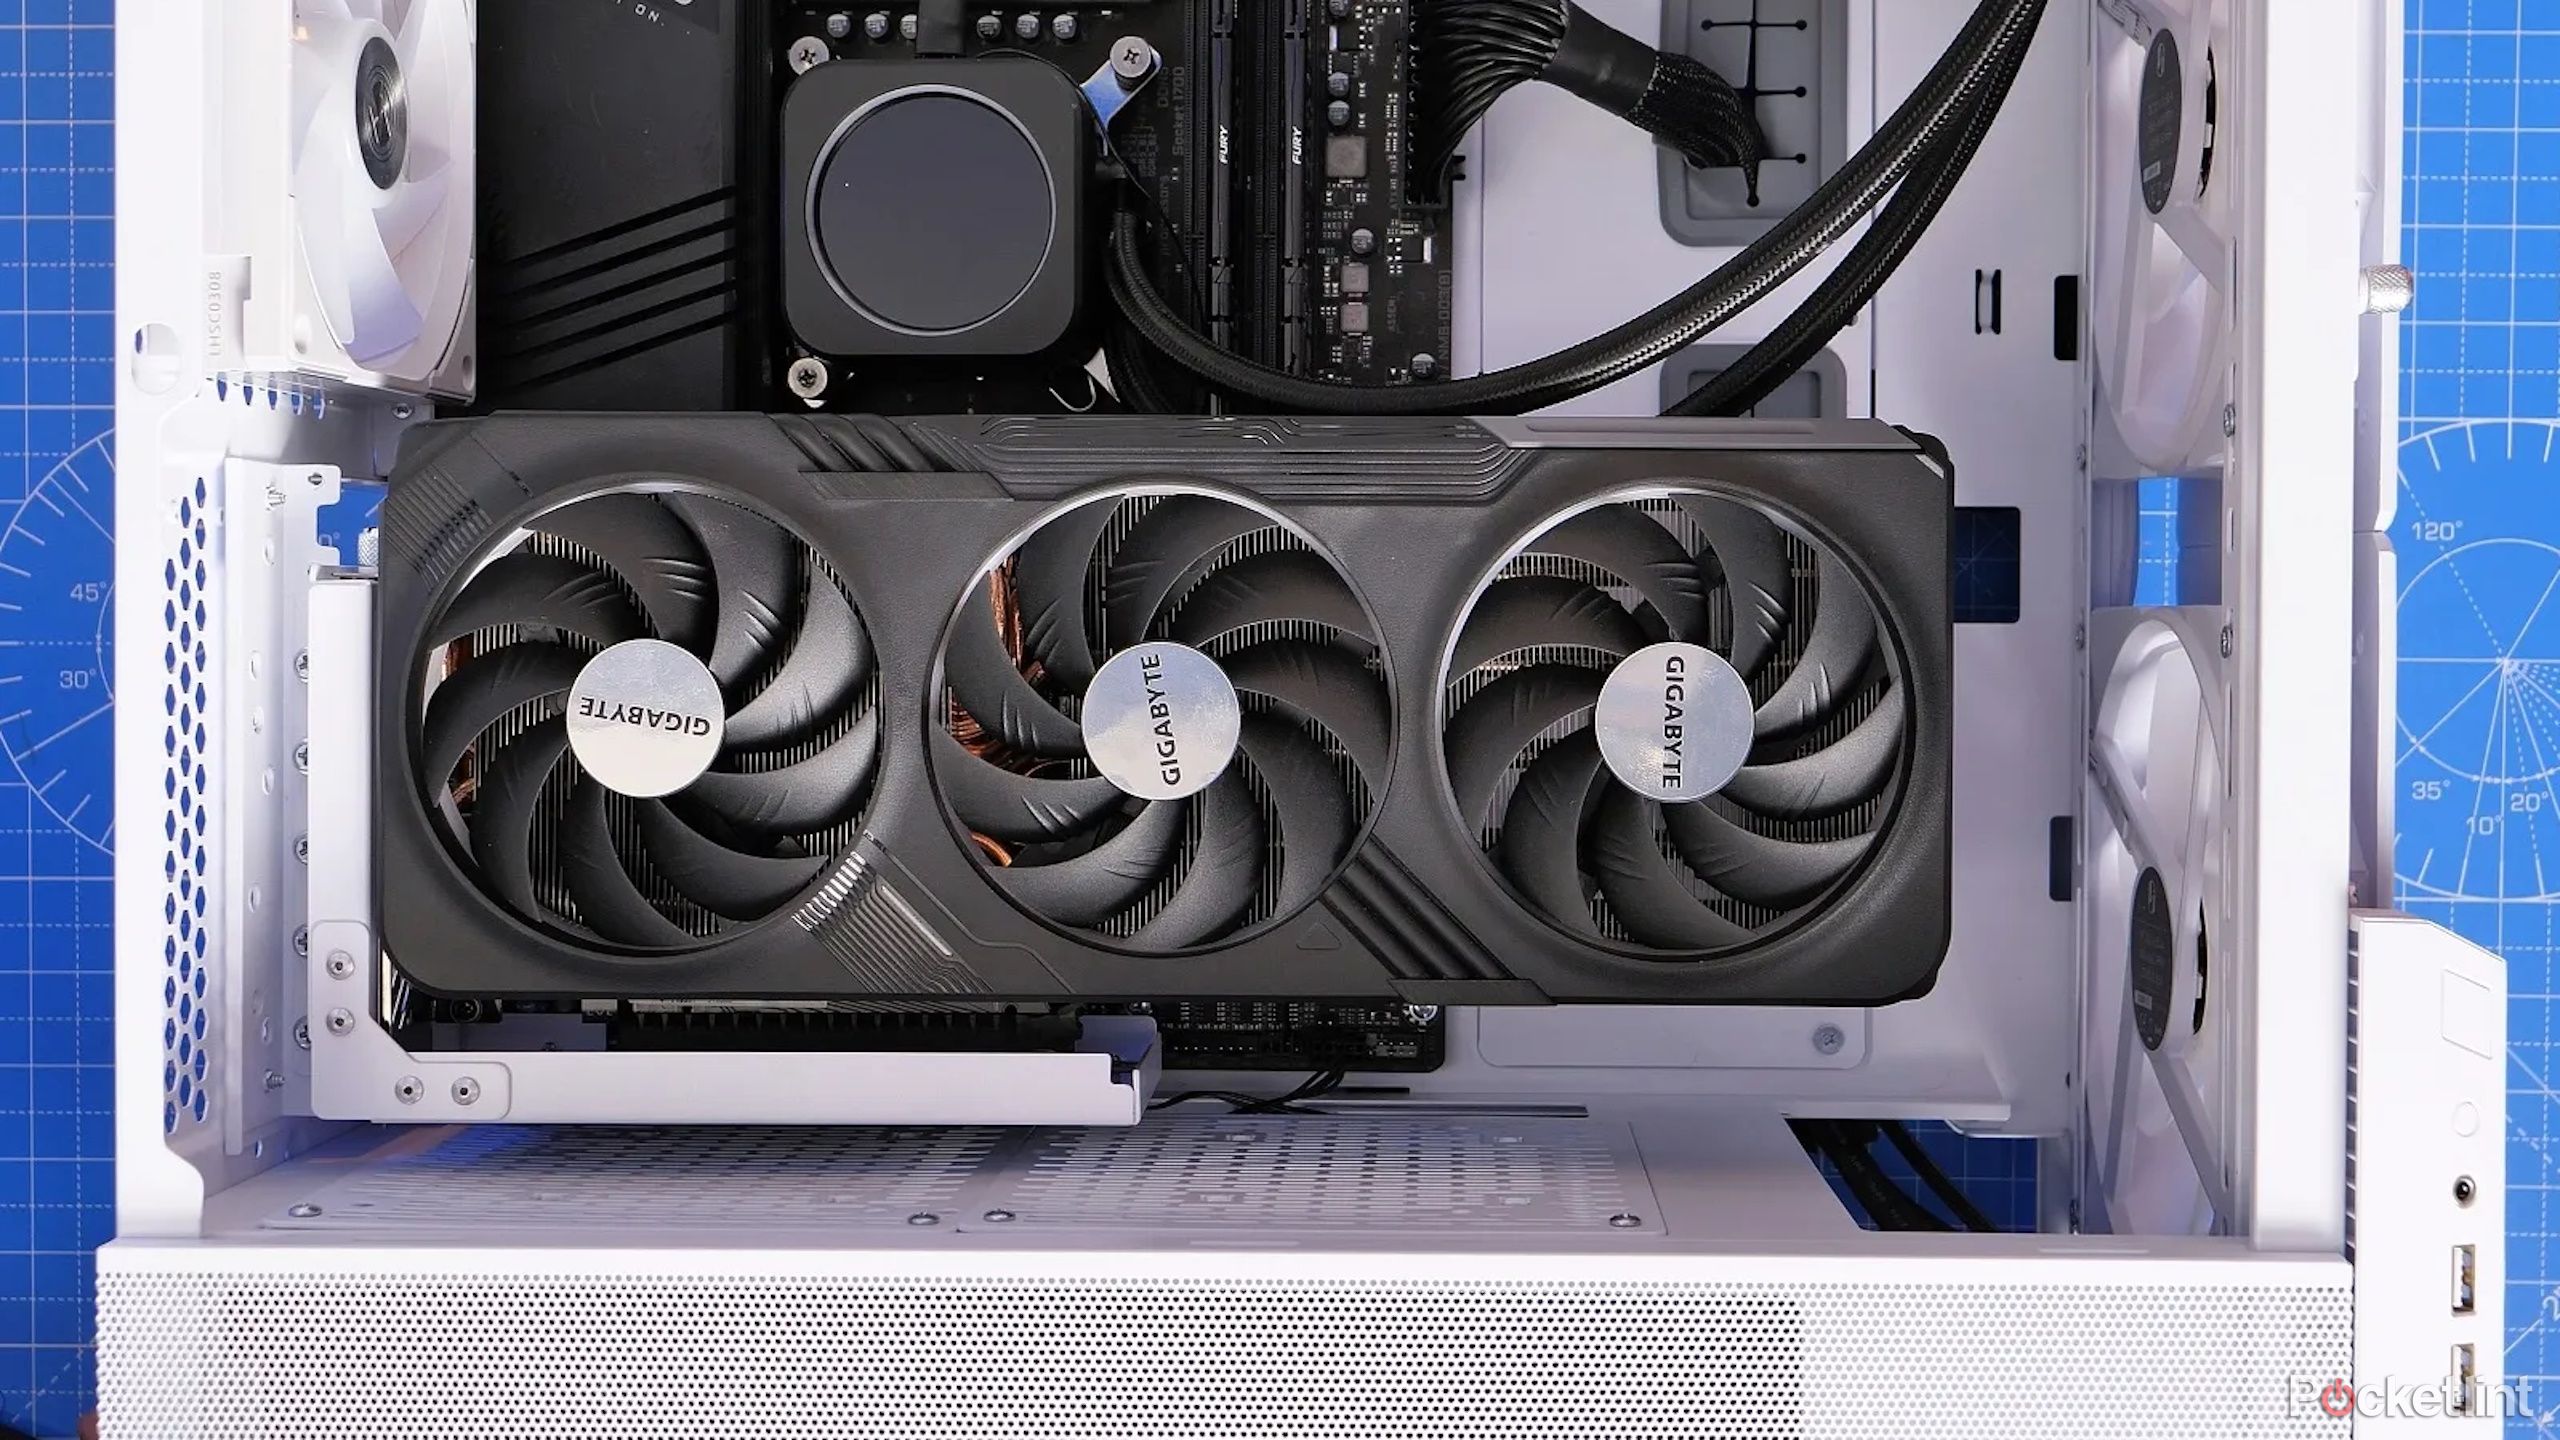 Graphics card in a PC case to represent GPU that will do GPU scaling